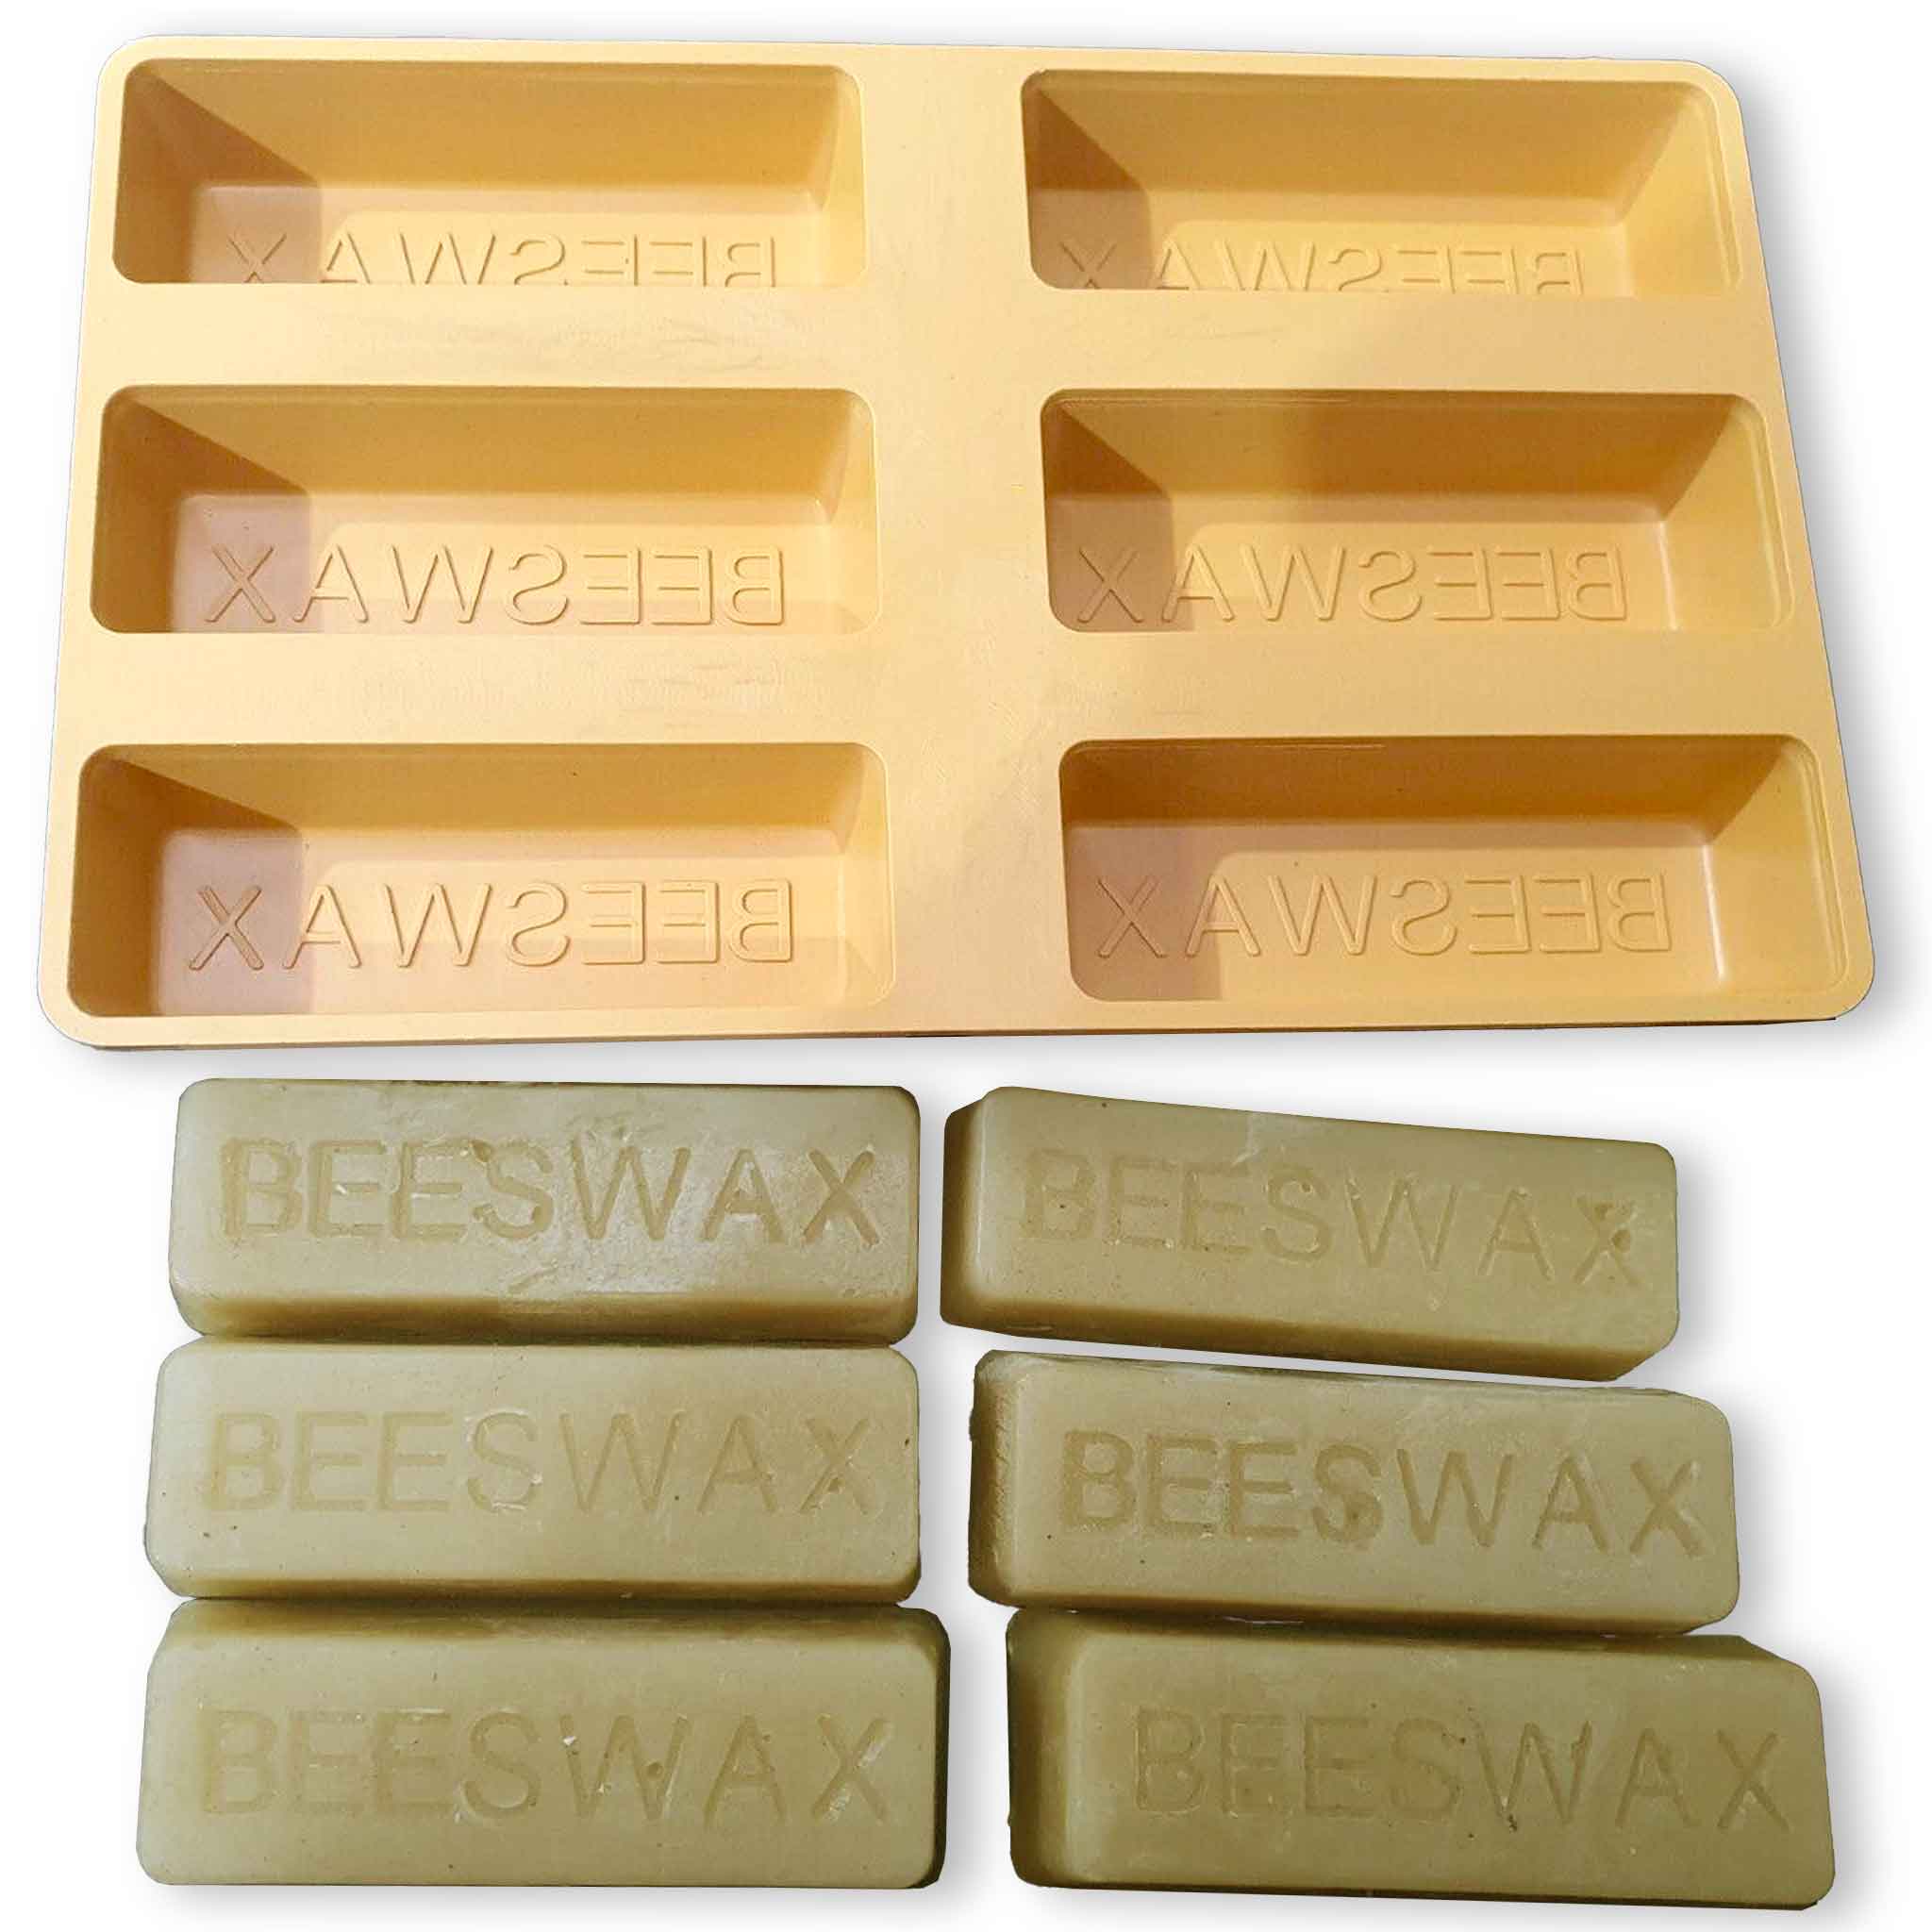 Beeswax Mould Plastic 6 Slabs of 250g - Processing collection by Buzzbee Beekeeping Supplies